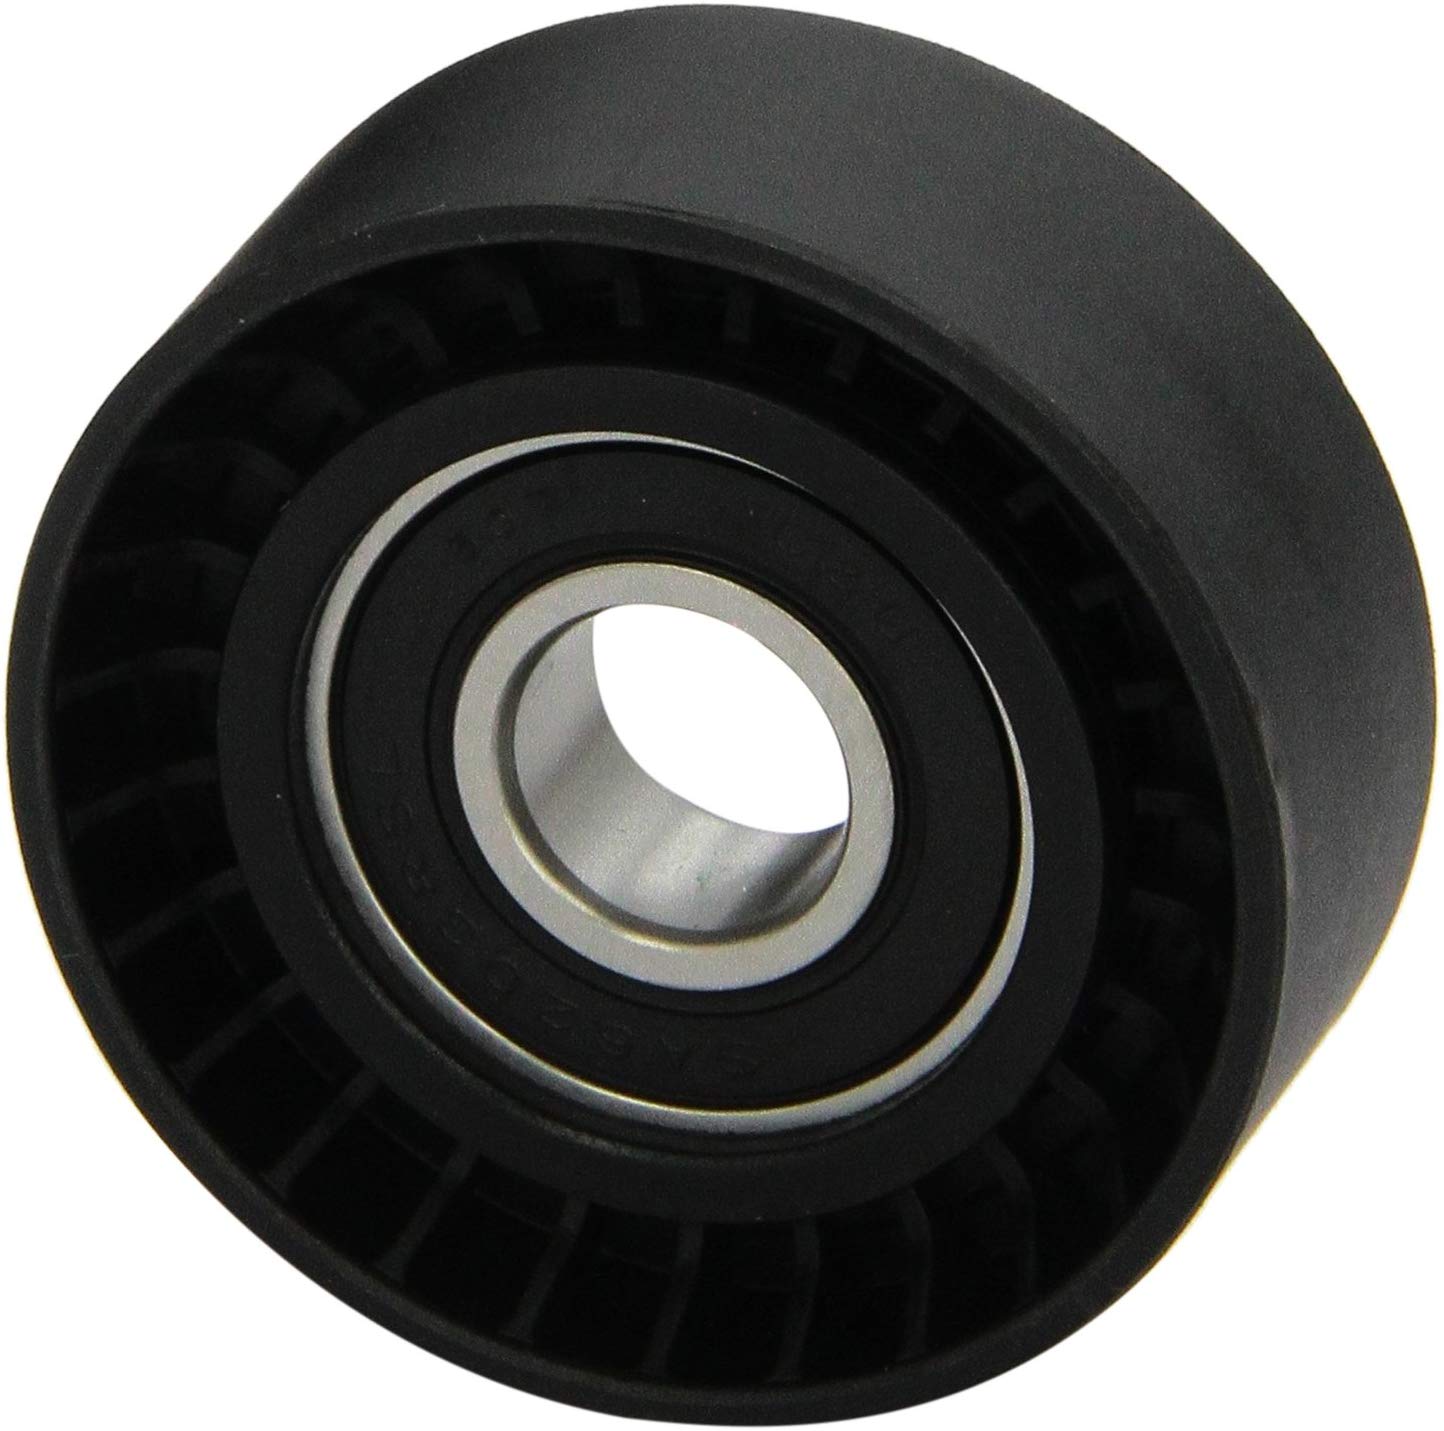 Dayco 89161 Belt Tensioner Pulley